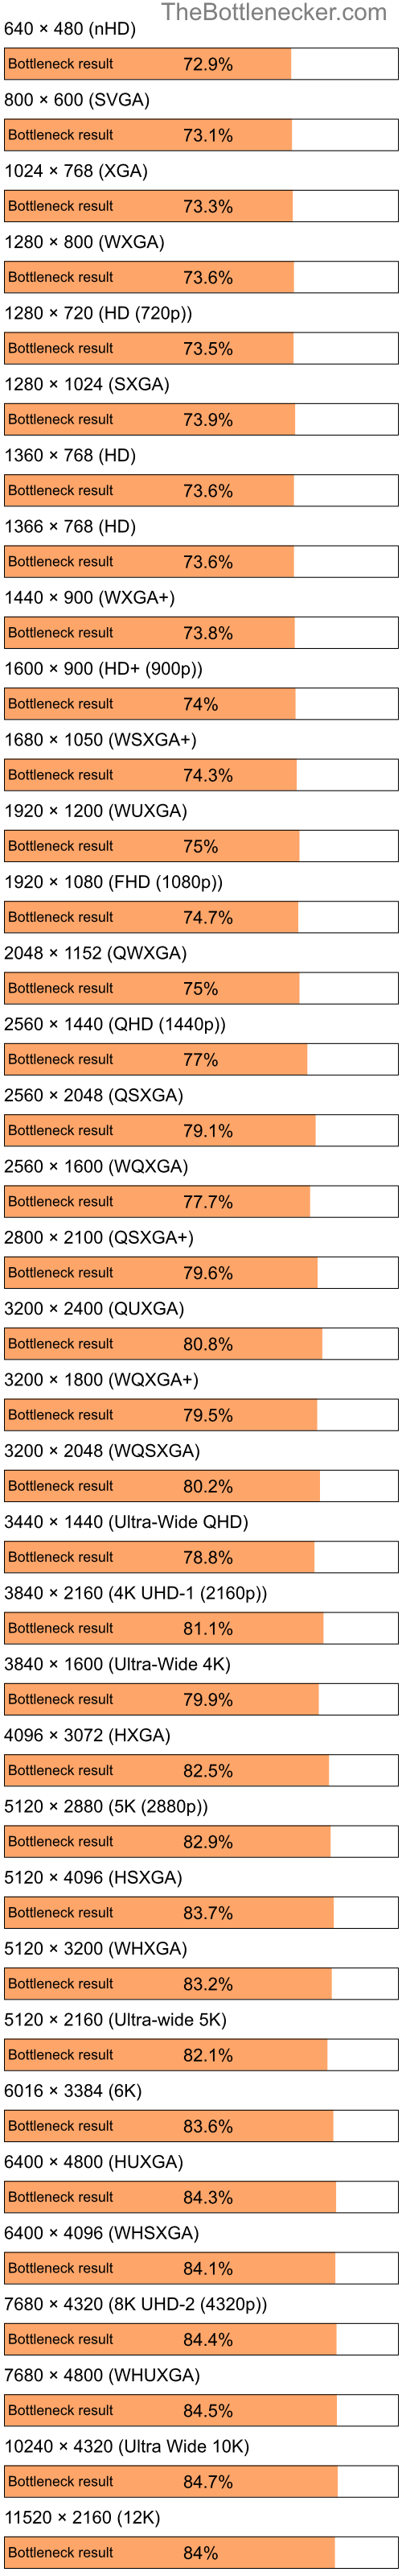 Bottleneck results by resolution for Intel Pentium 4 and NVIDIA GeForce nForce 630a in Processor Intense Tasks